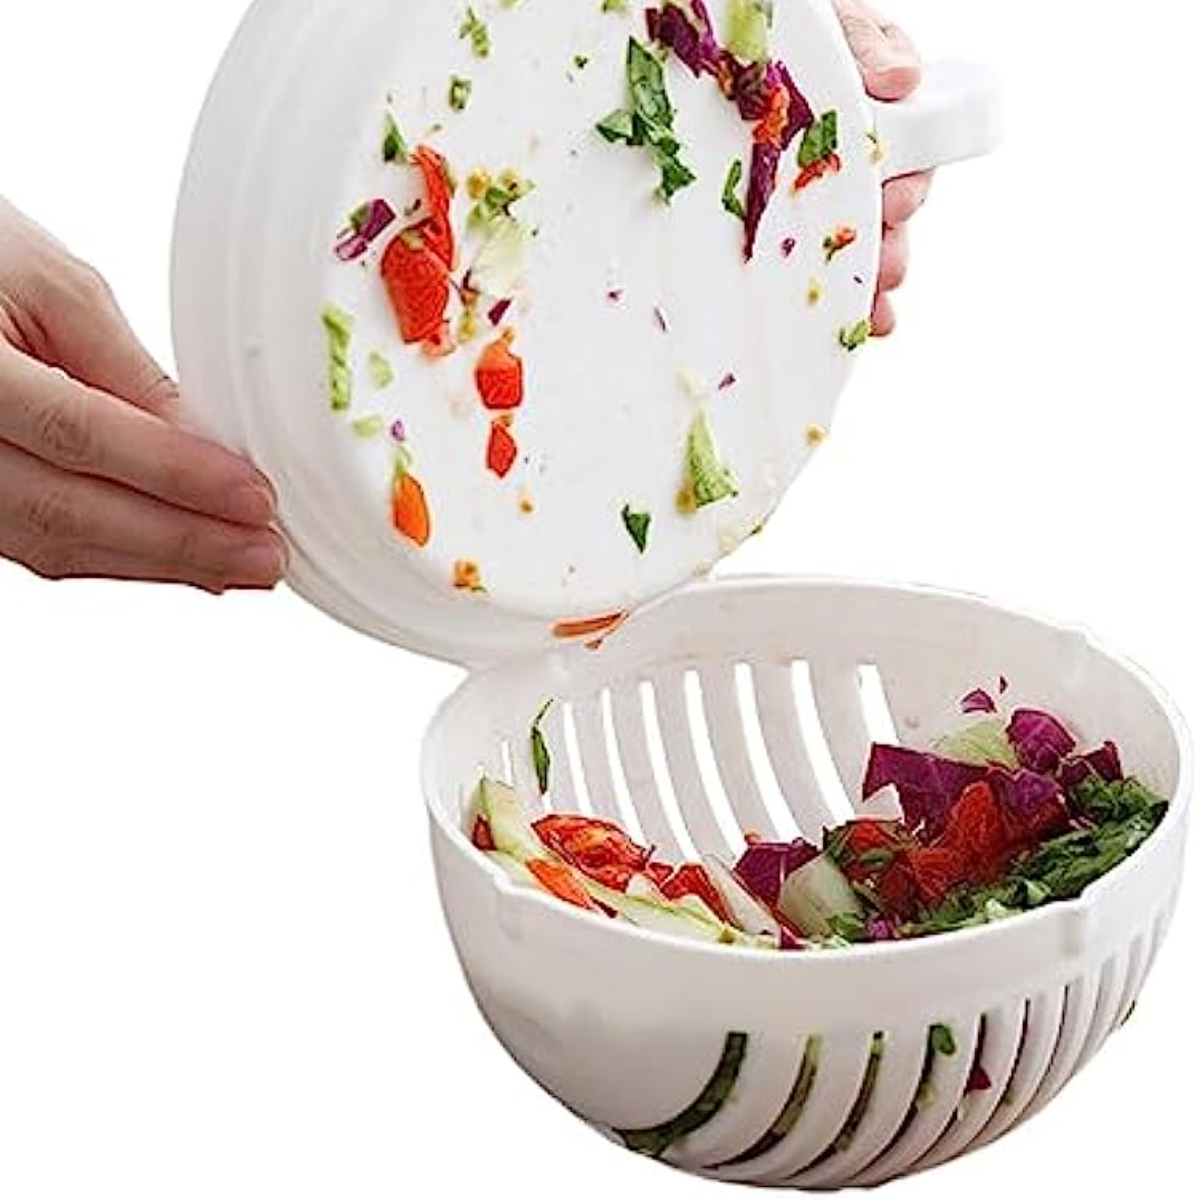 Salad Chopper Vegetable Salad Cutter Cutting Bowl Vegetable Slices Cut  Fruit for Kitchen Tools Accessories Gadgets Kitchen Items